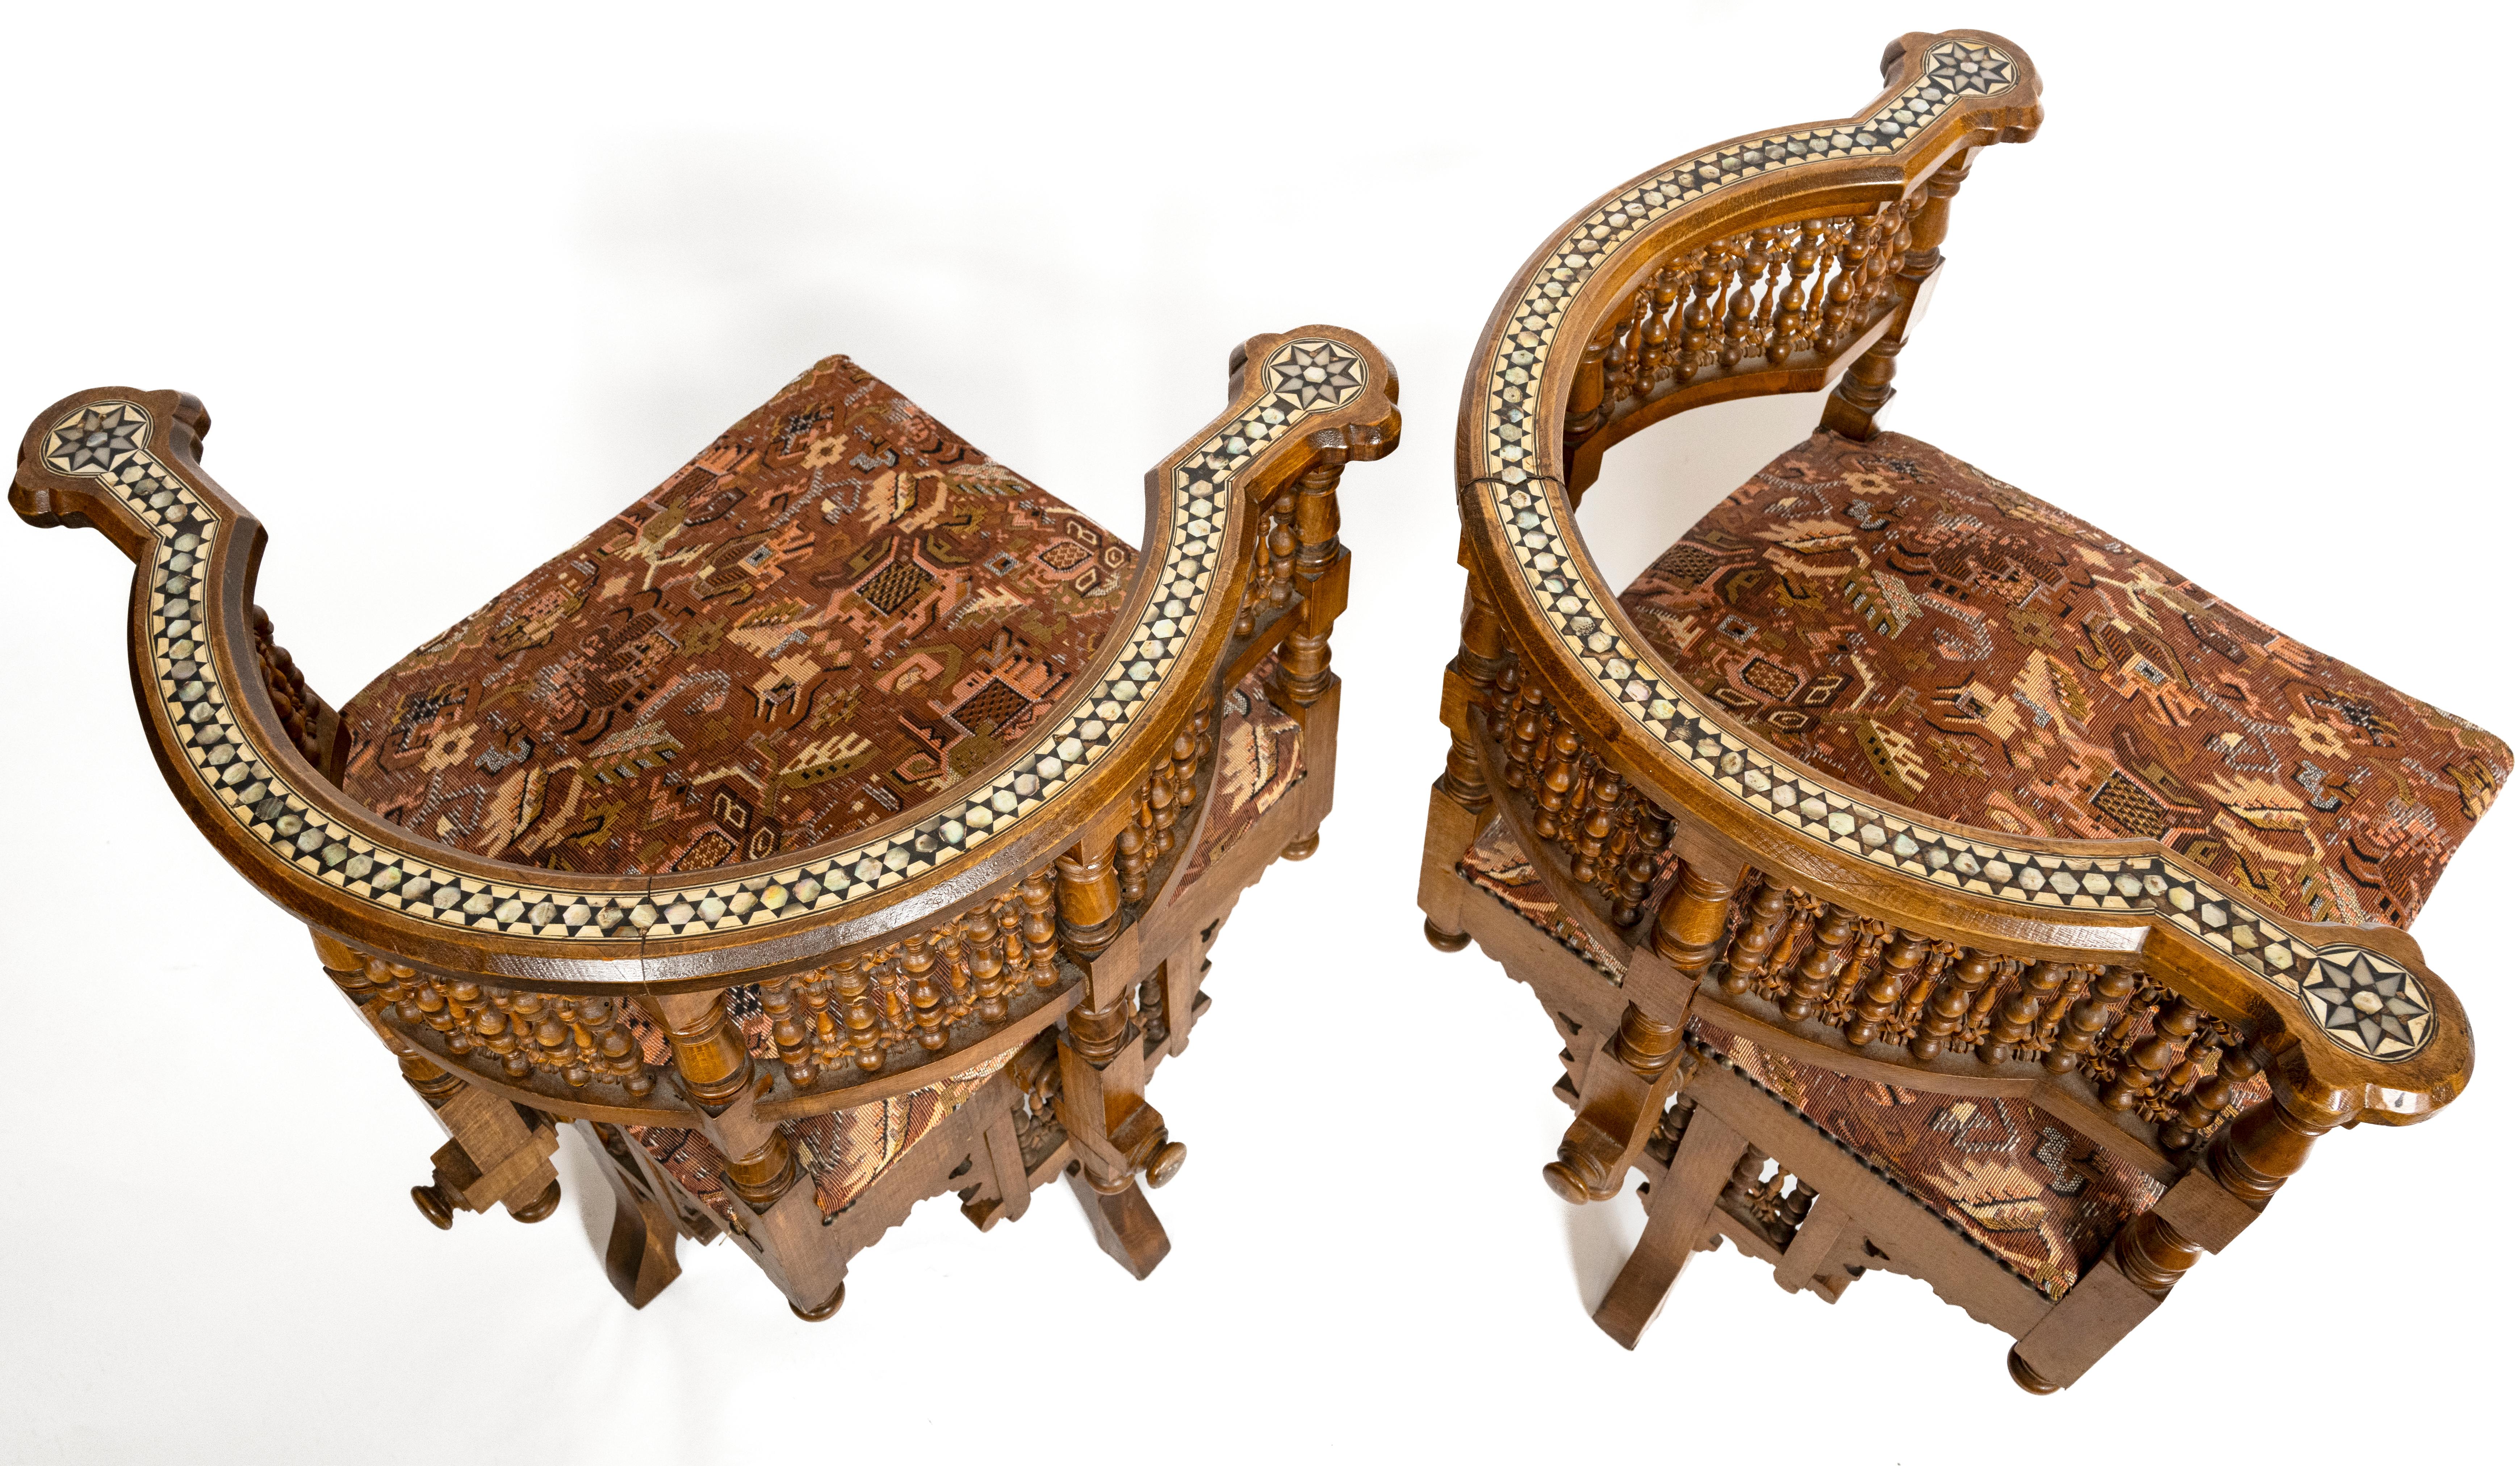 A pair of 19th century Moorish-style American maple open arm chairs. The mother of pearl inlay around the top and legs with a star motif. The back having traditional North African-inspired fretwork. Circa 1870.

Seat Depth: 25.5